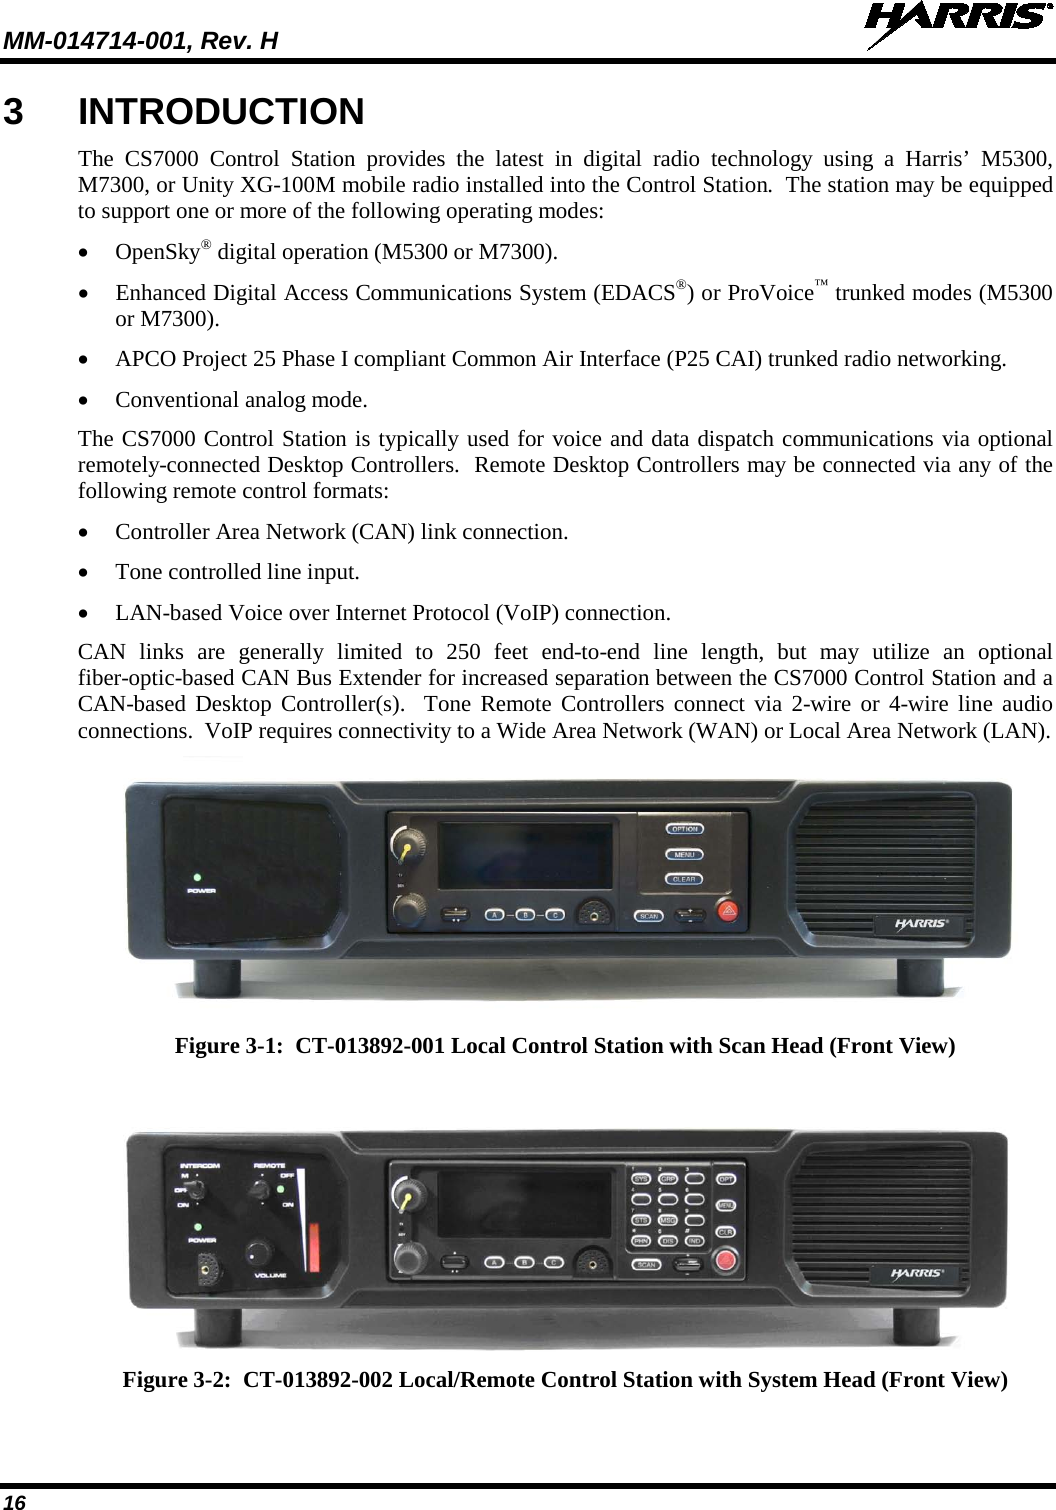 MM-014714-001, Rev. H   16 3  INTRODUCTION The  CS7000  Control Station provides the latest in digital radio technology  using  a  Harris’  M5300, M7300, or Unity XG-100M mobile radio installed into the Control Station.  The station may be equipped to support one or more of the following operating modes: • OpenSky® digital operation (M5300 or M7300). • Enhanced Digital Access Communications System (EDACS®) or ProVoice™ trunked modes (M5300 or M7300). • APCO Project 25 Phase I compliant Common Air Interface (P25 CAI) trunked radio networking. • Conventional analog mode. The CS7000 Control Station is typically used for voice and data dispatch communications via optional remotely-connected Desktop Controllers.  Remote Desktop Controllers may be connected via any of the following remote control formats: • Controller Area Network (CAN) link connection. • Tone controlled line input. • LAN-based Voice over Internet Protocol (VoIP) connection. CAN links  are generally limited to 250 feet end-to-end  line length, but may  utilize an optional fiber-optic-based CAN Bus Extender for increased separation between the CS7000 Control Station and a CAN-based Desktop Controller(s).  Tone Remote Controllers connect via 2-wire or 4-wire line audio connections.  VoIP requires connectivity to a Wide Area Network (WAN) or Local Area Network (LAN).  Figure 3-1:  CT-013892-001 Local Control Station with Scan Head (Front View)    Figure 3-2:  CT-013892-002 Local/Remote Control Station with System Head (Front View) 